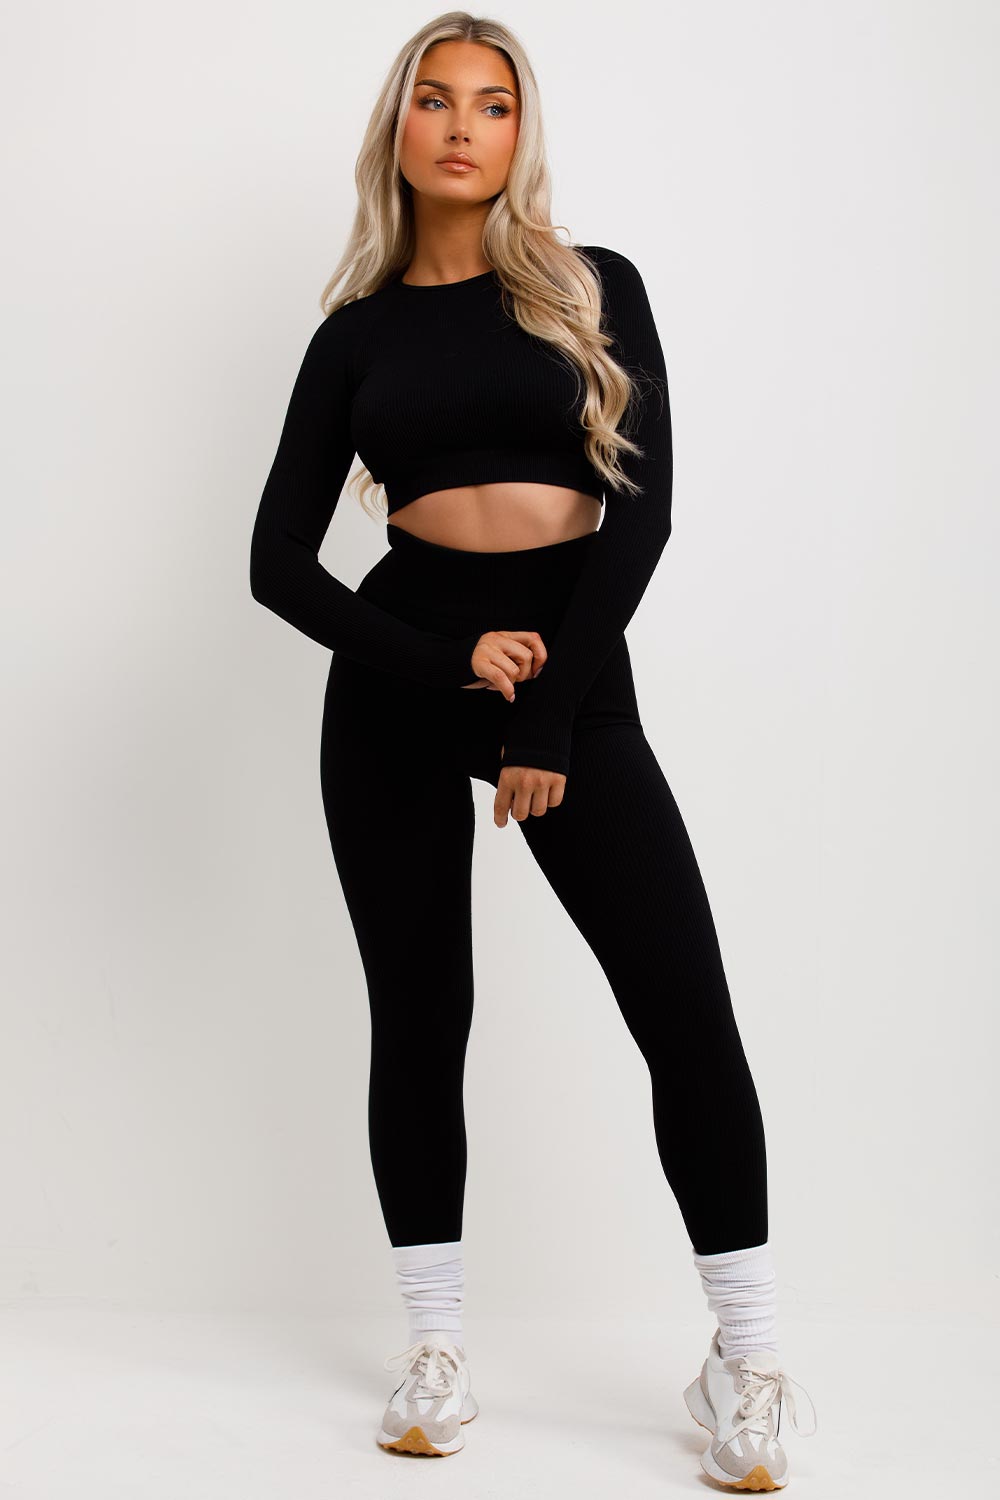 womens gym wear leggings and top set